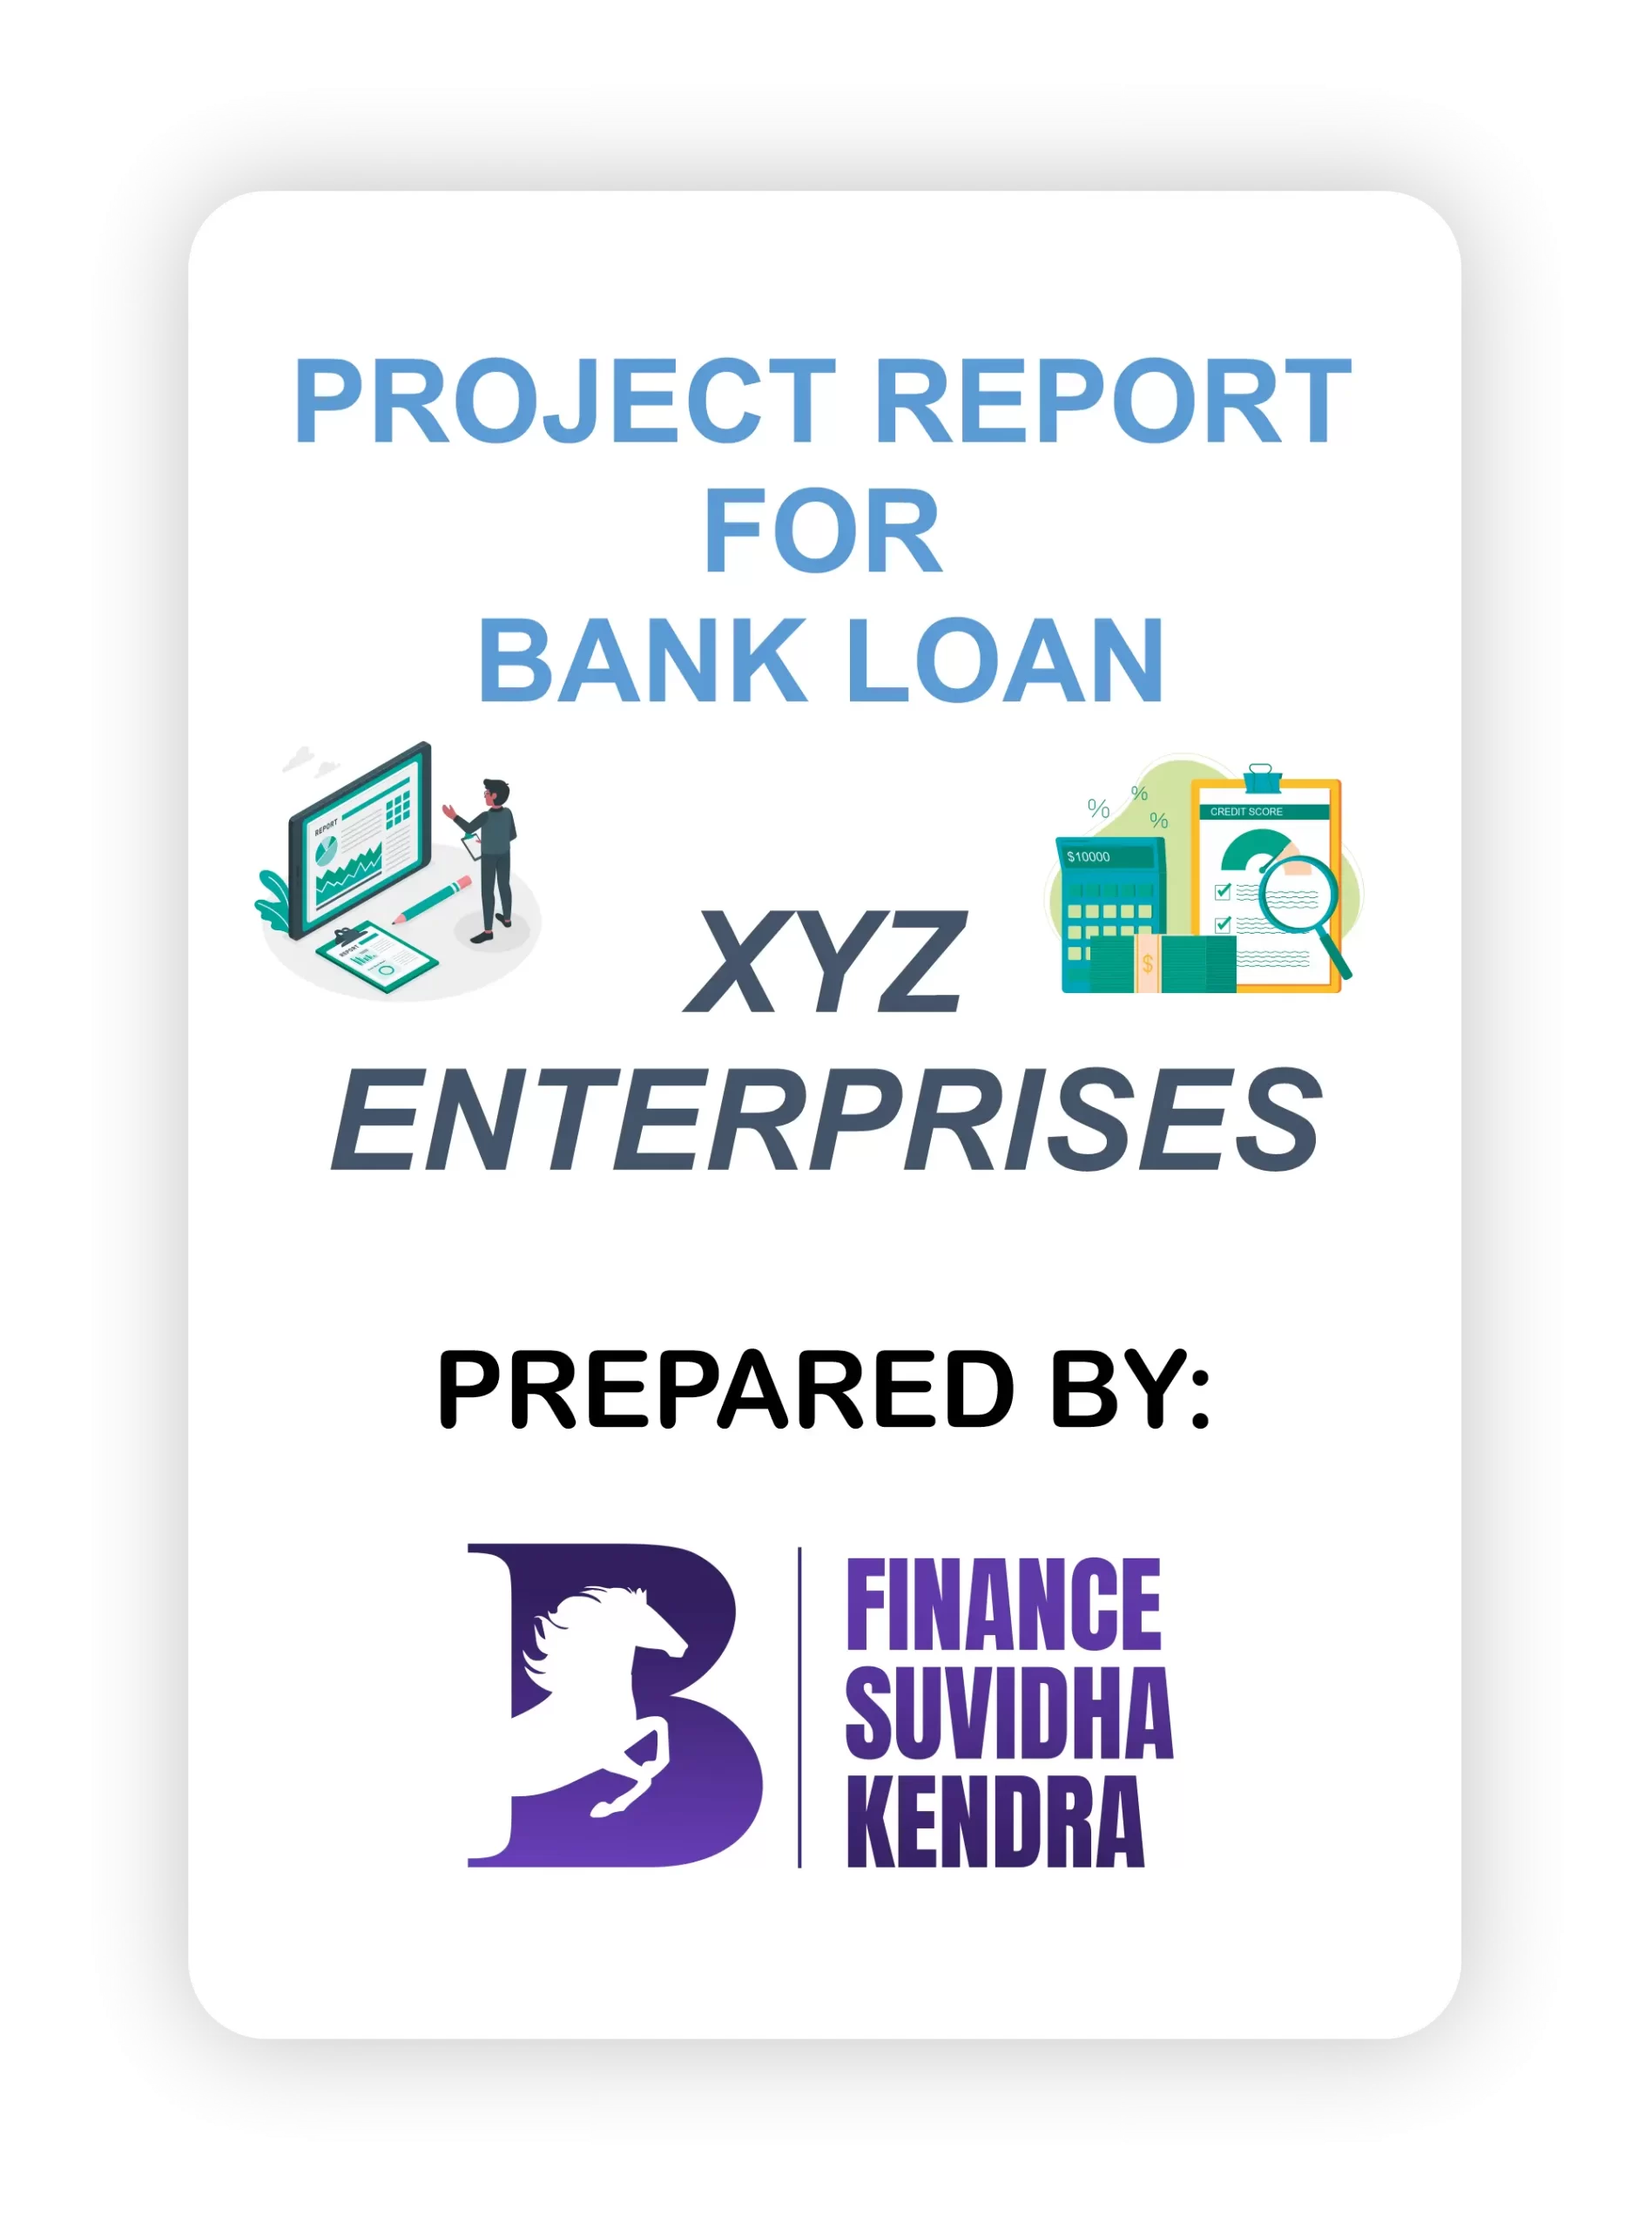 PROJECT REPORT FOR BANK LOAN